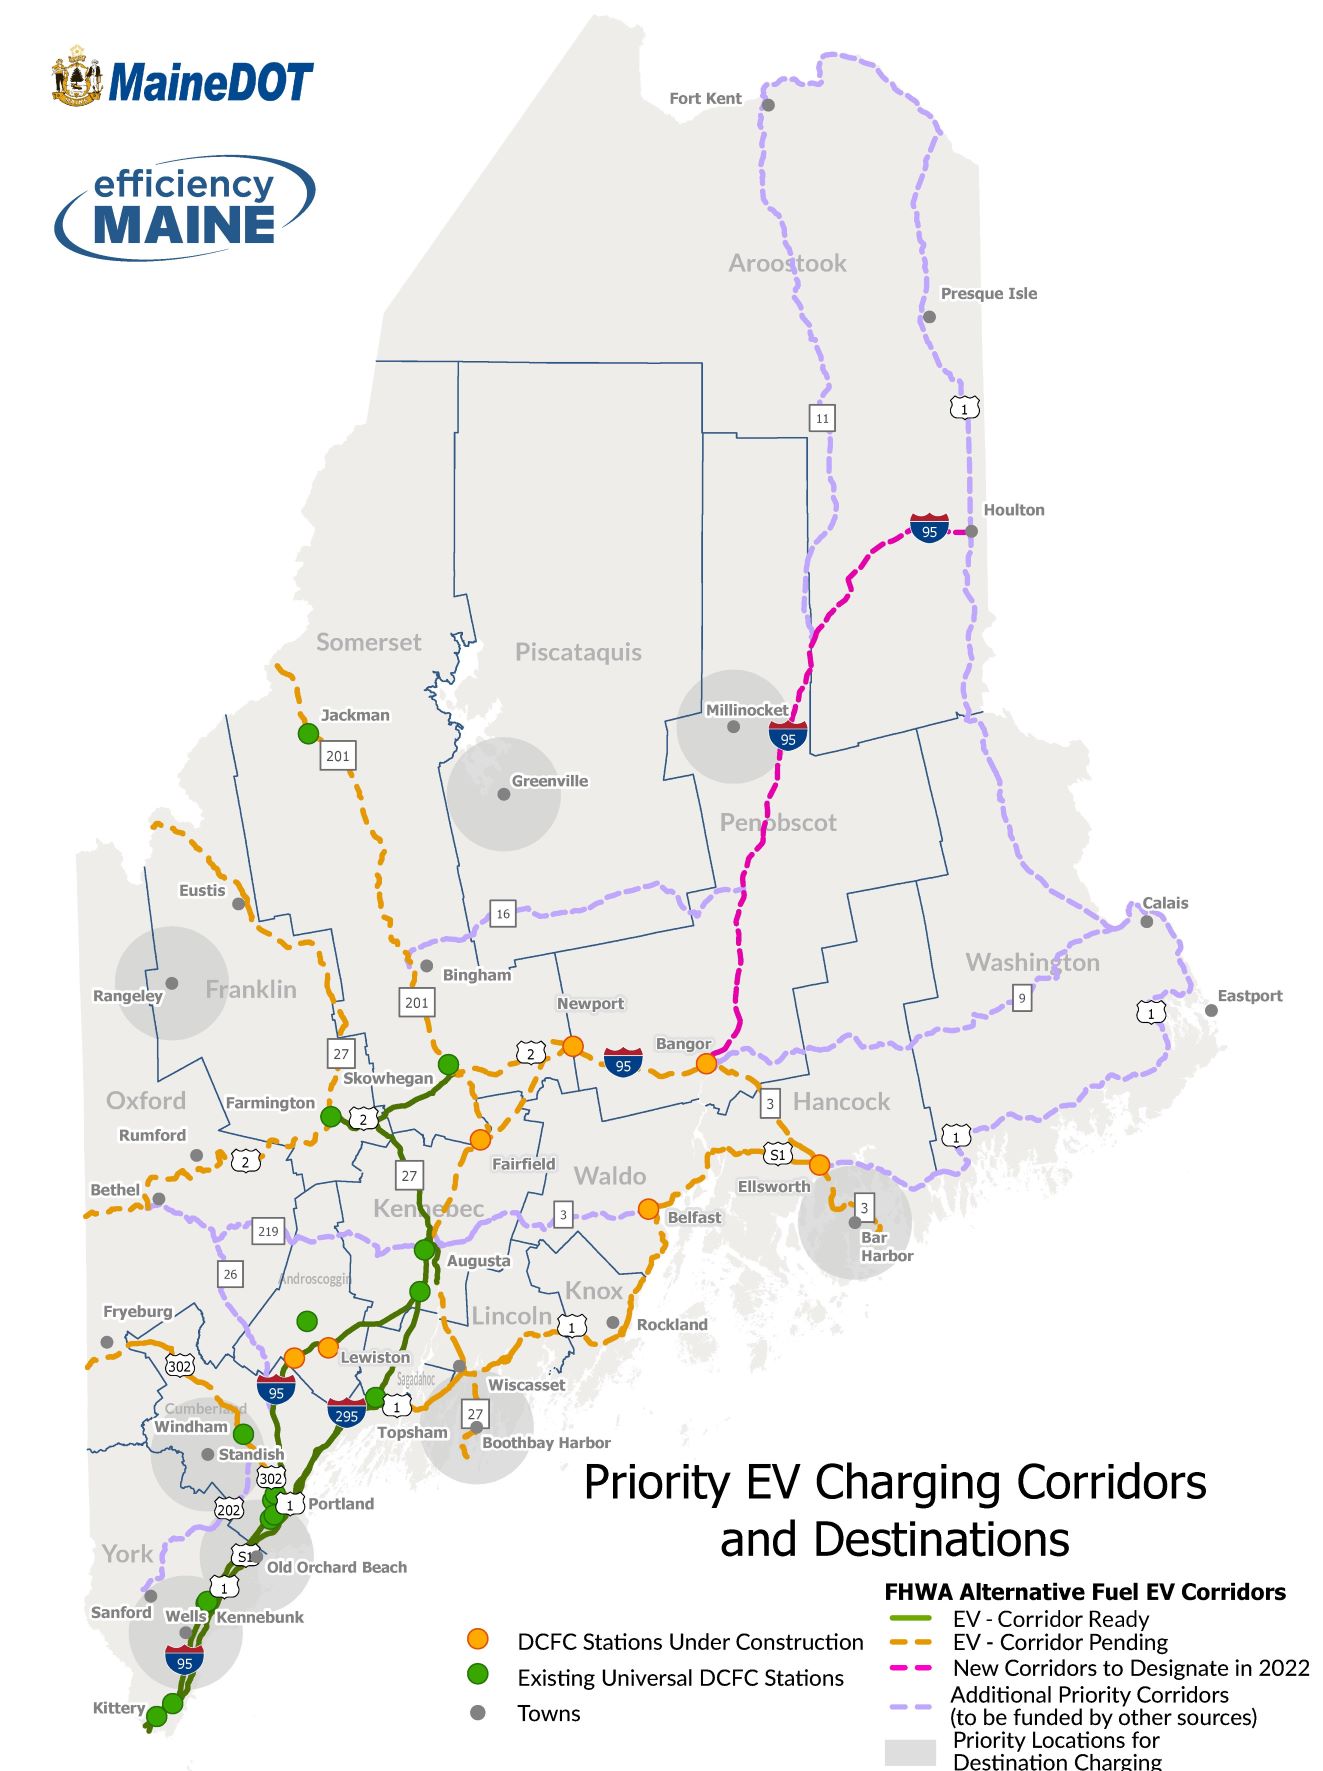 A map of Maine detailing planned priority electric vehicle charging corridors and destinations.